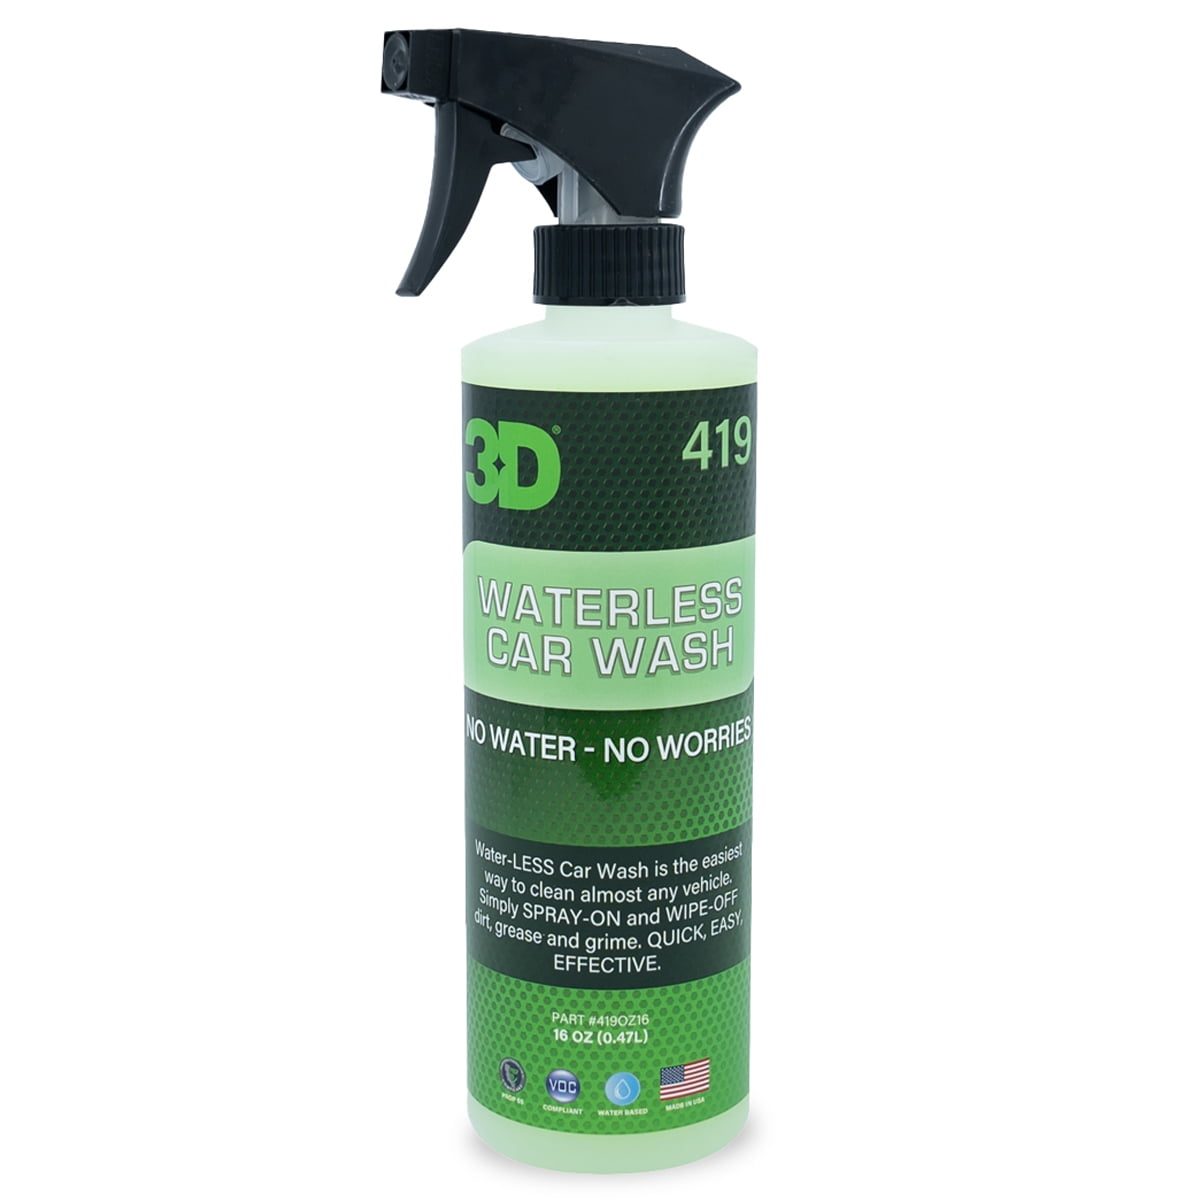 3D Waterless Car Wash - Easy Spray Waterless Detailing Spray - No Soap or Water Needed - Great on Cars, RVs, Motorcycles & Boats 16oz